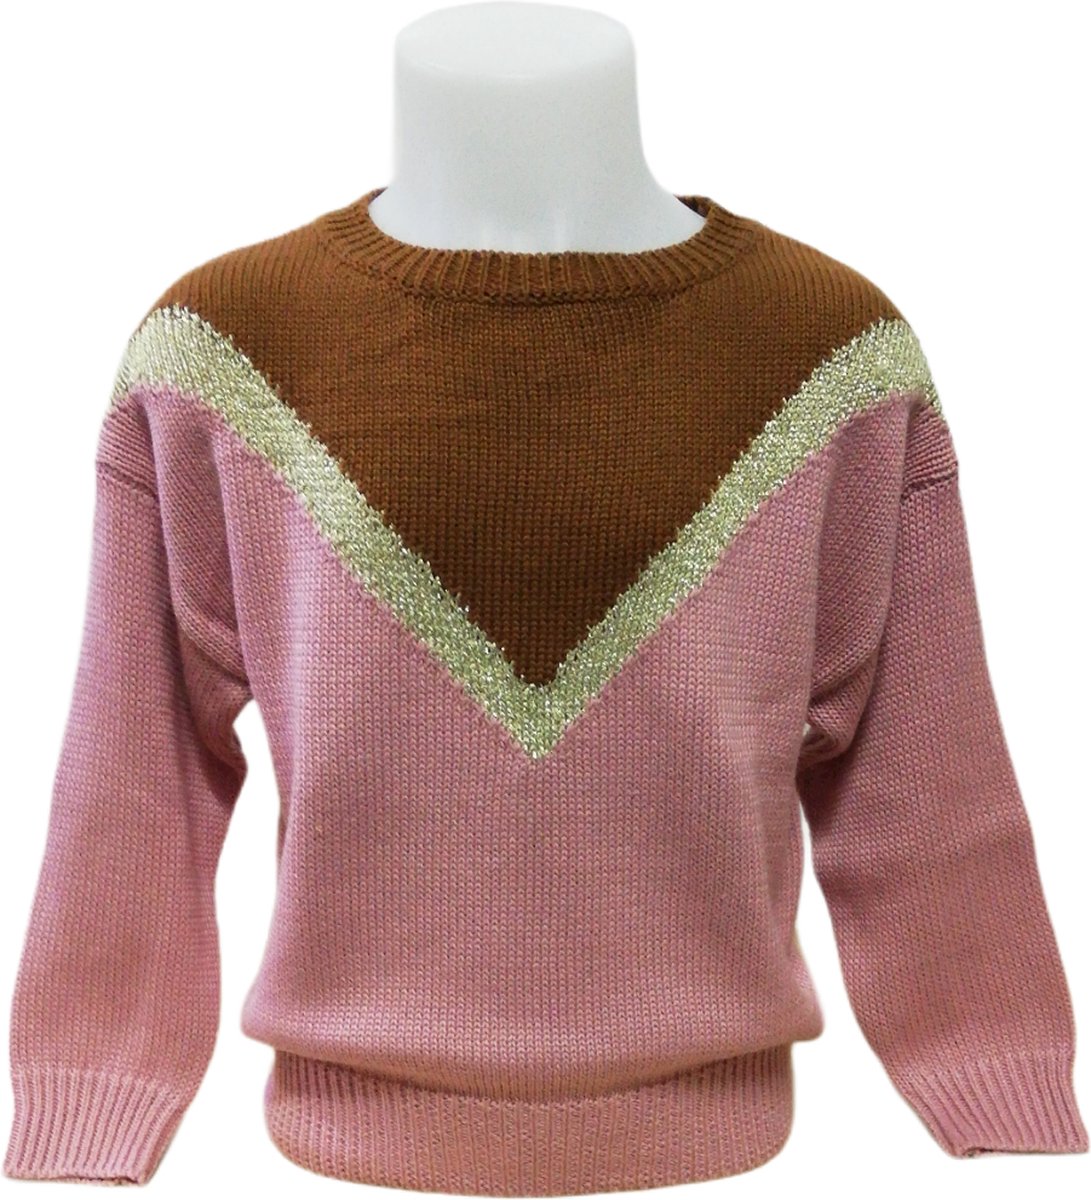 THE NEW Meisjes Ratina Pull knit